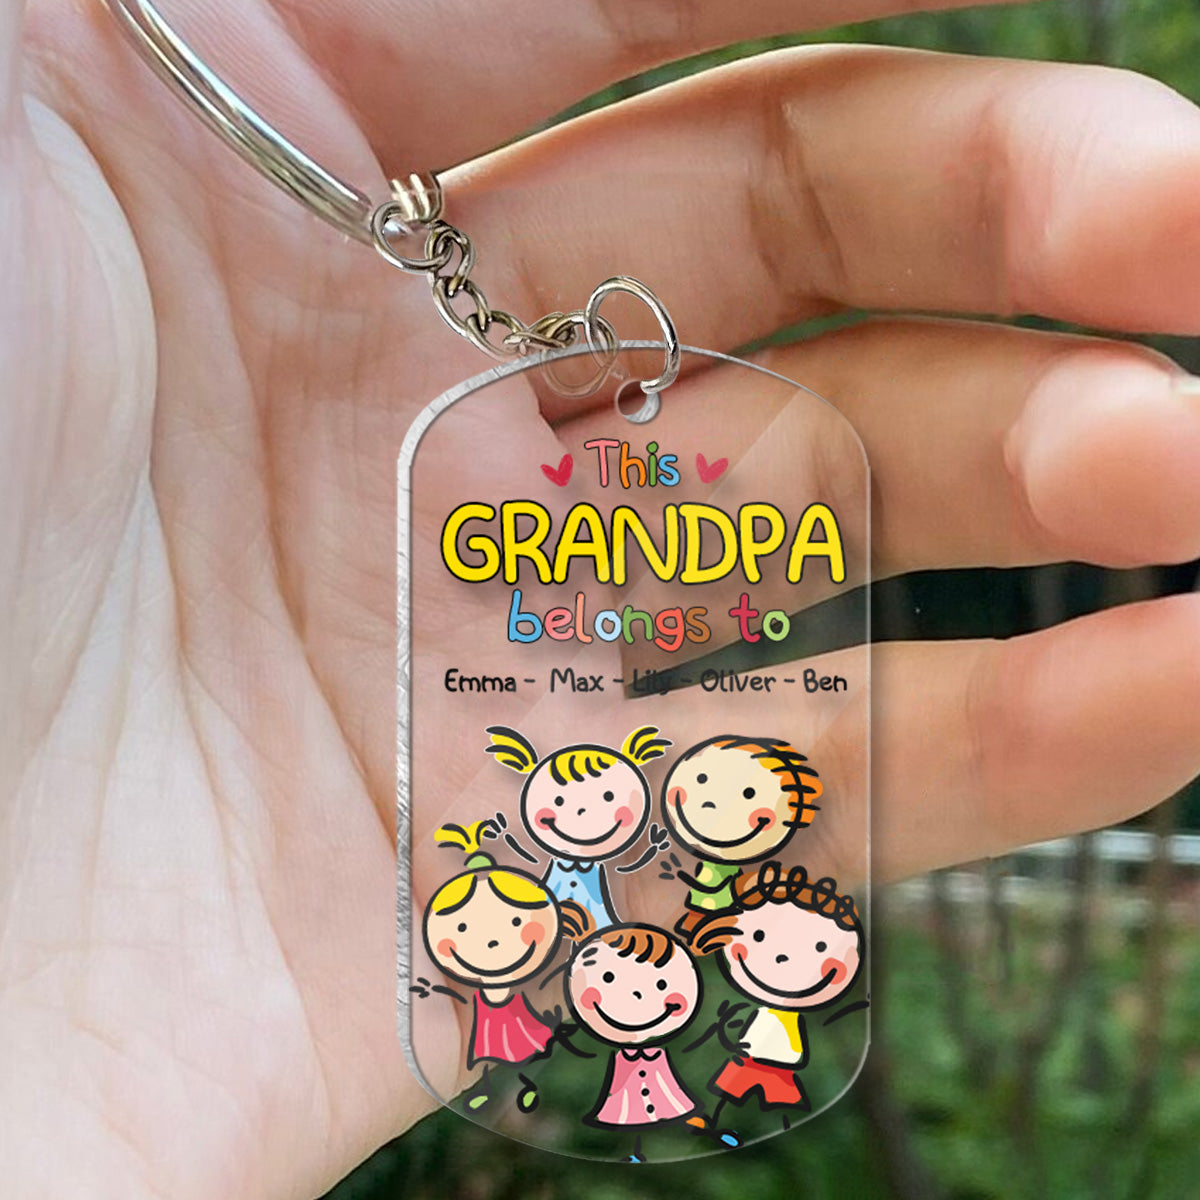 Discover This Grandpa Belongs To - Gift for grandpa, grandma, mom, dad, uncle, aunt, brother, sister - Personalized Keychain